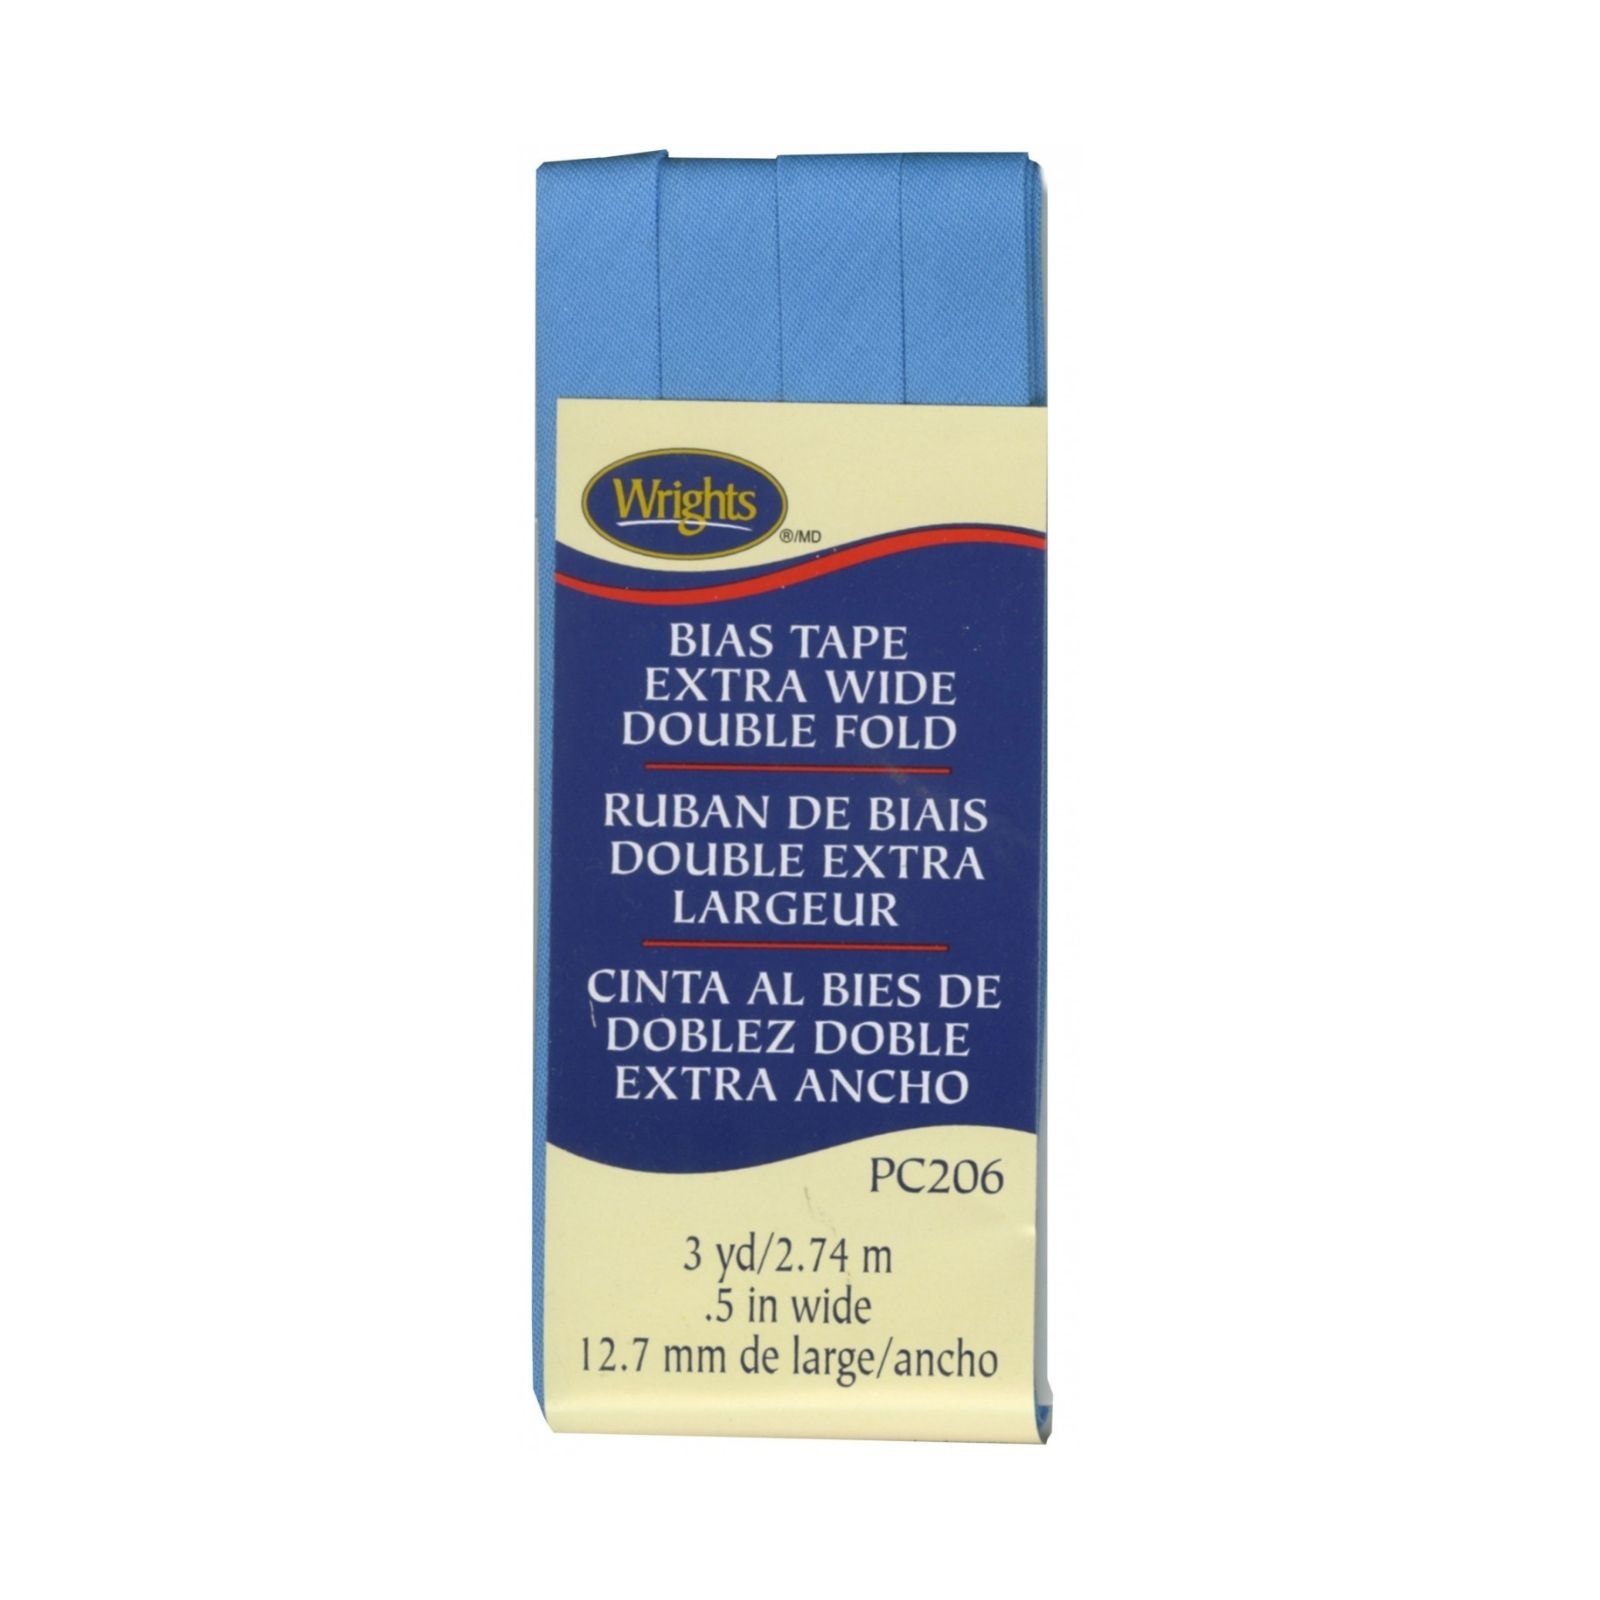 Wrights Extra Wide Double Fold Bias Tape - Porcelain Blue